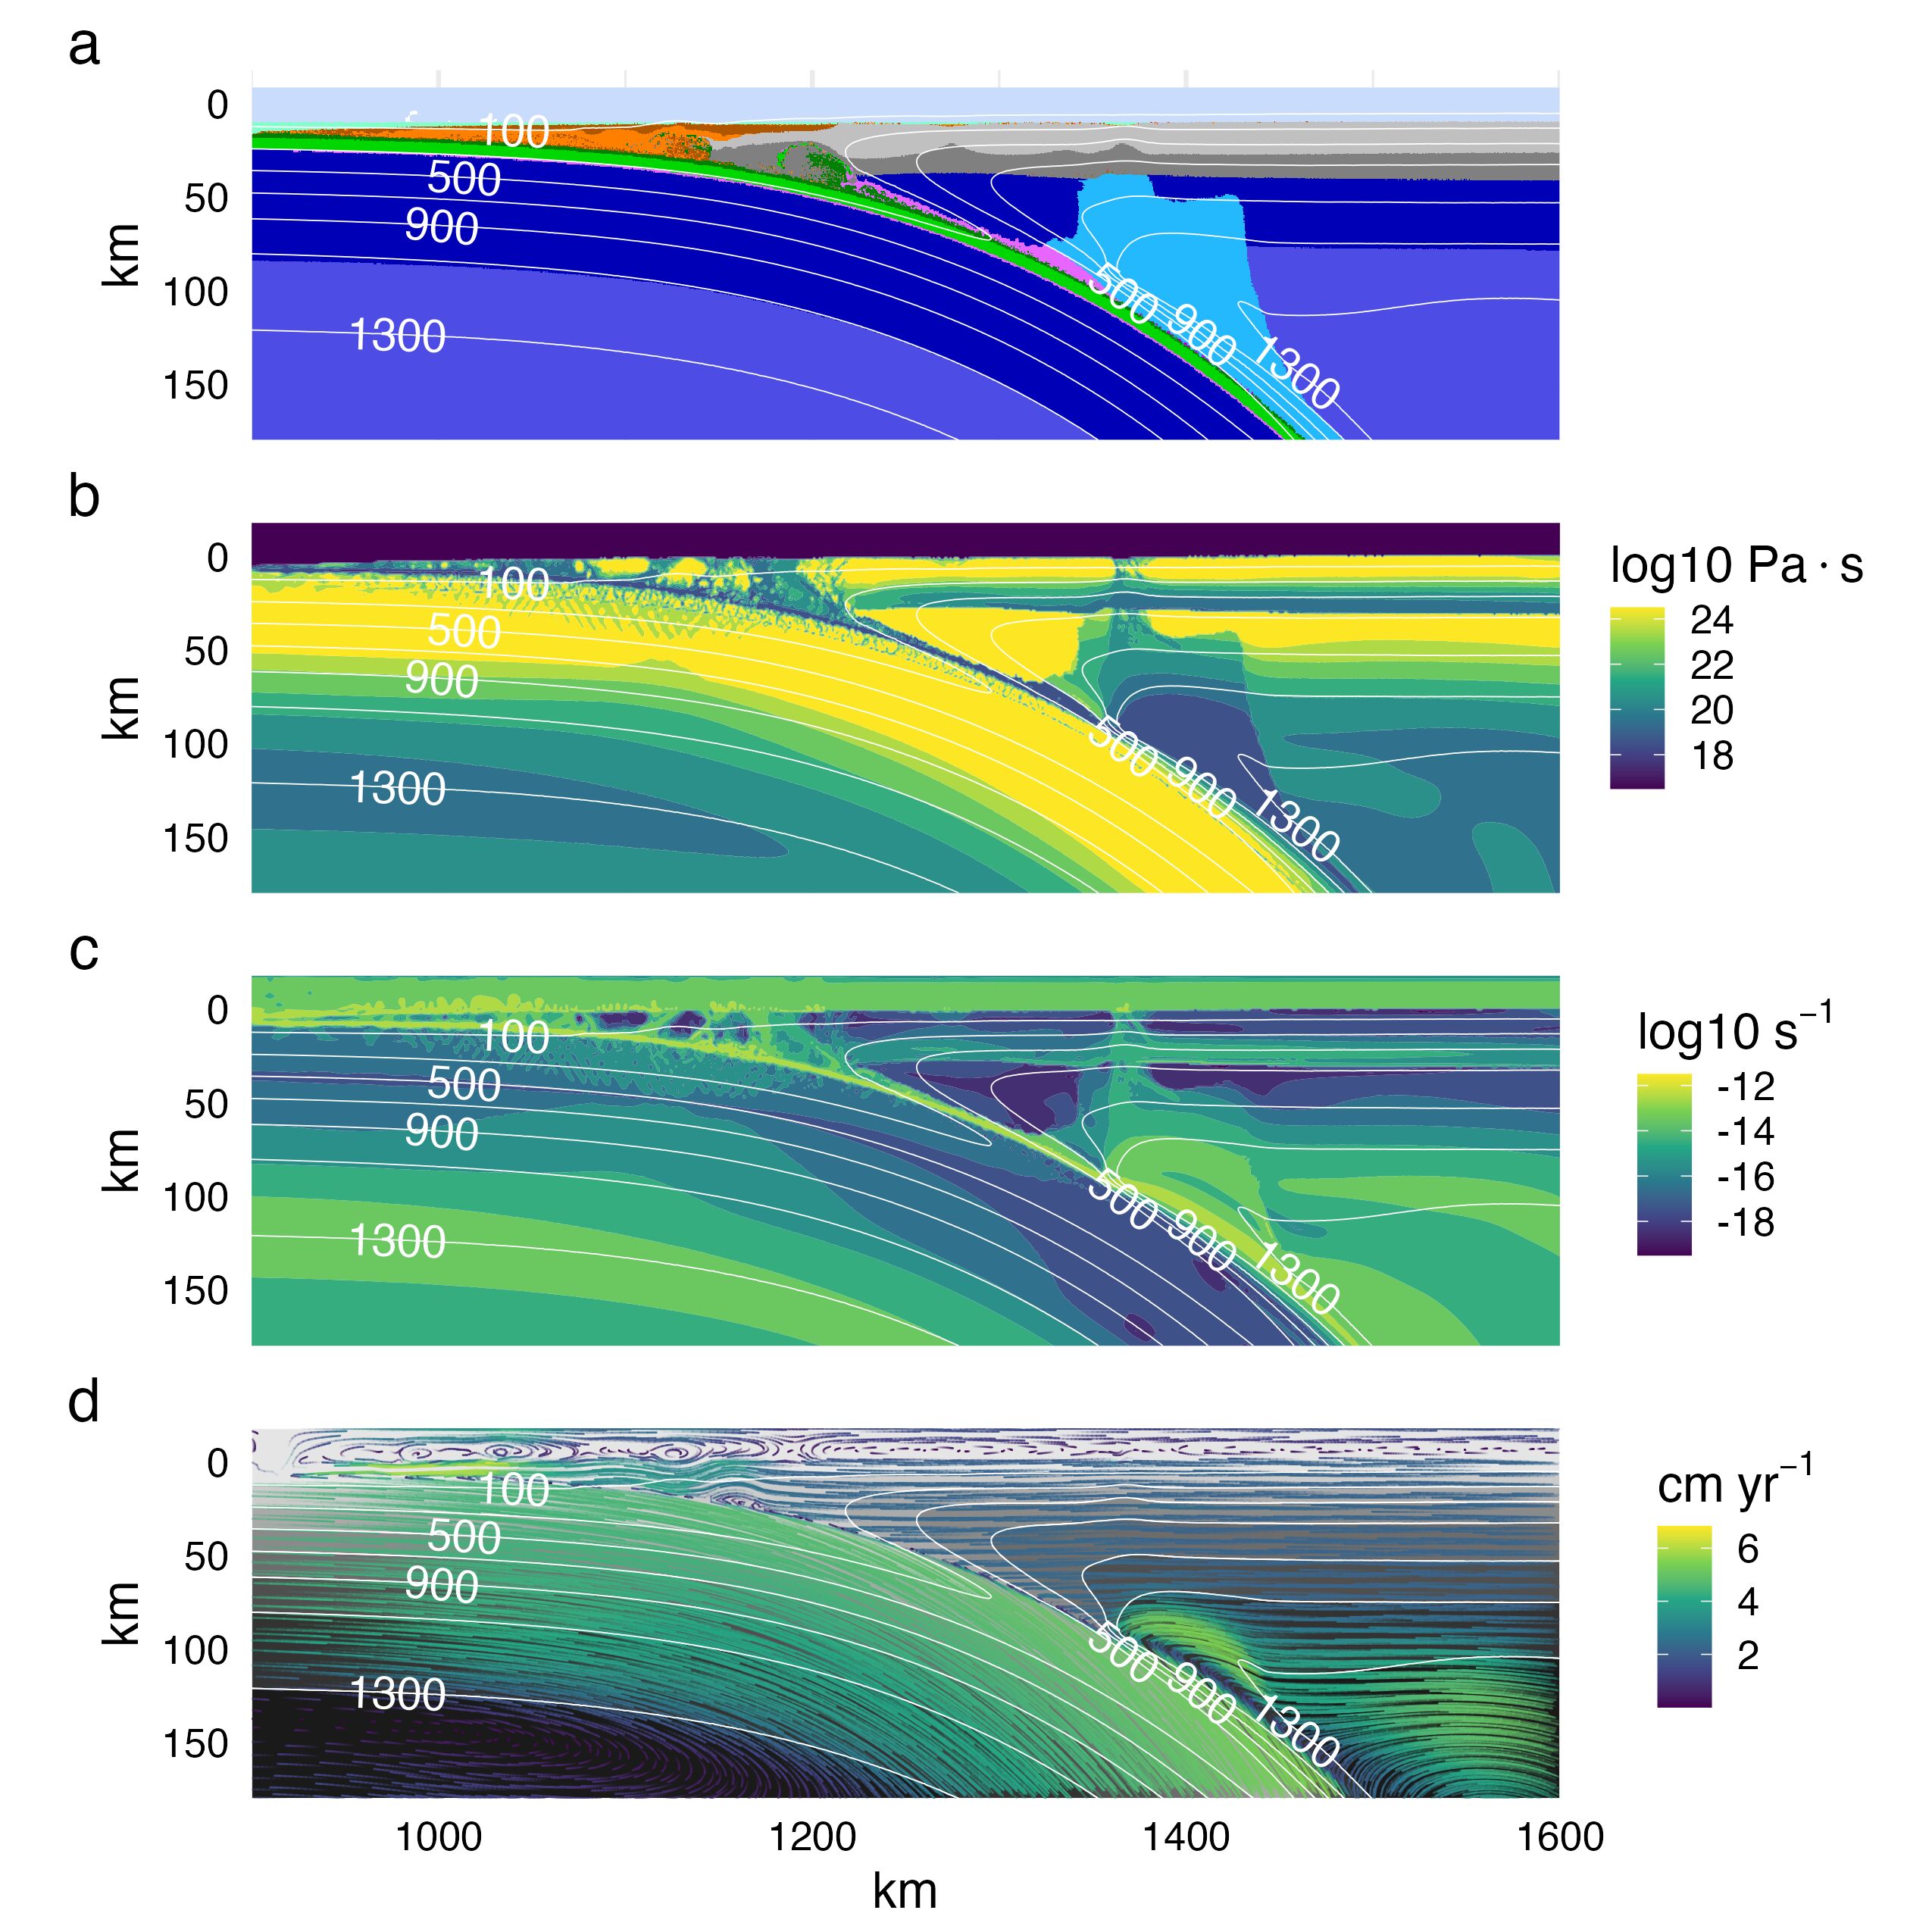 Visualizing standard model cdf with $Z_{UP}$ = 78 km at 9.93 Ma. (a) Rock type. (b) Temperature. (c) Viscosity. (d) Streamlines. Geodynamics remain approximately constant from 5 Ma (cf. Figure \@ref(fig:cdfStep2)). The system remains in steady state for as long water fluxes to the upper-plate mantle and serpentine is stable. Rock type colors are the same as Figure \@ref(fig:init).